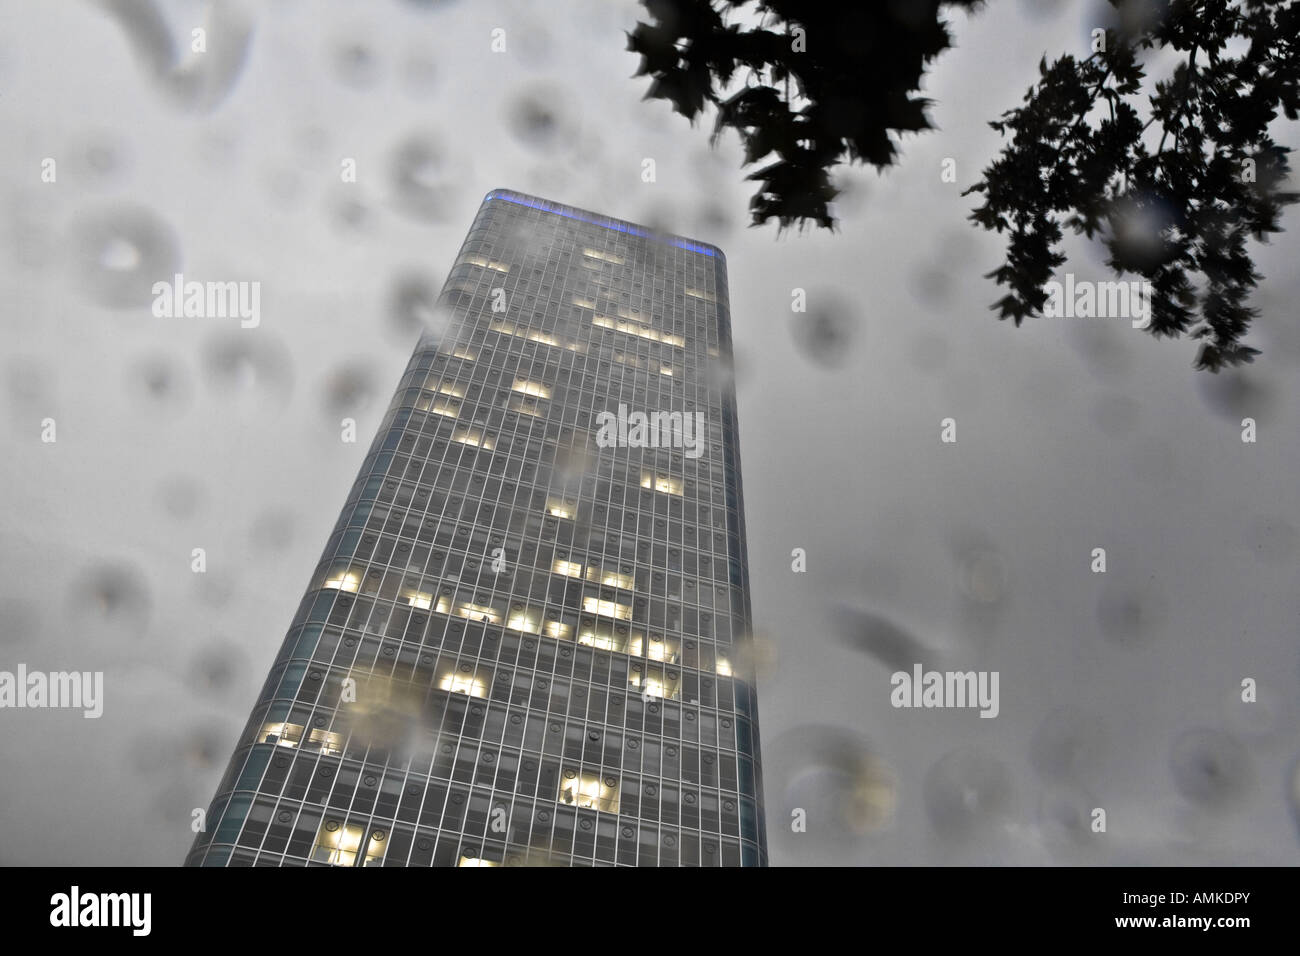 The O2 headquarters building in Munich on a dark, rainy day. Stock Photo